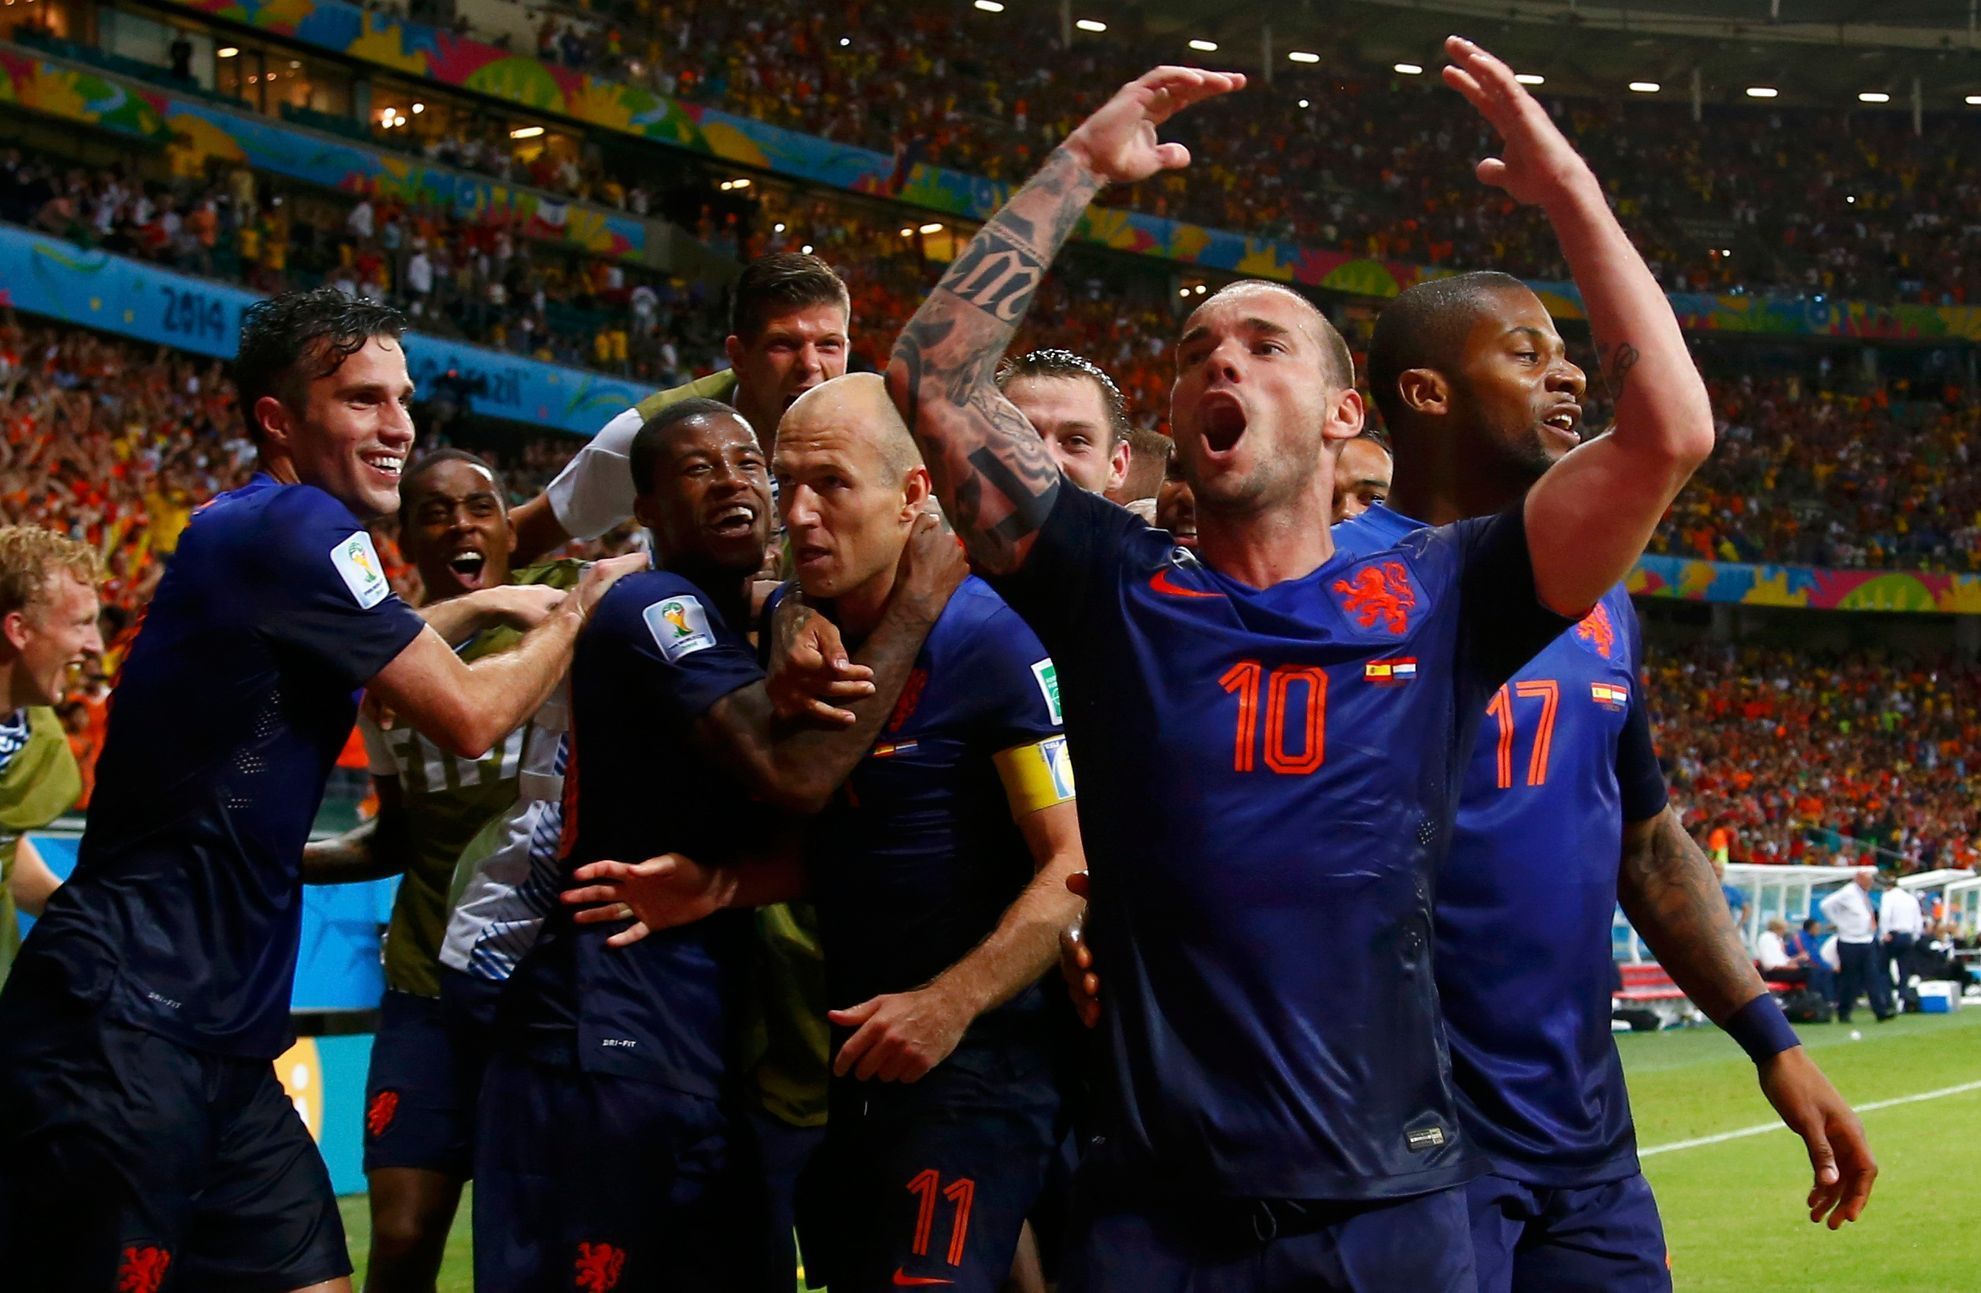 Robben of the Netherlands is congratulated by his teammates after he scored a goal against Spain during their 2014 World Cup Group B soccer match at the Fonte Nova arena in Salvador